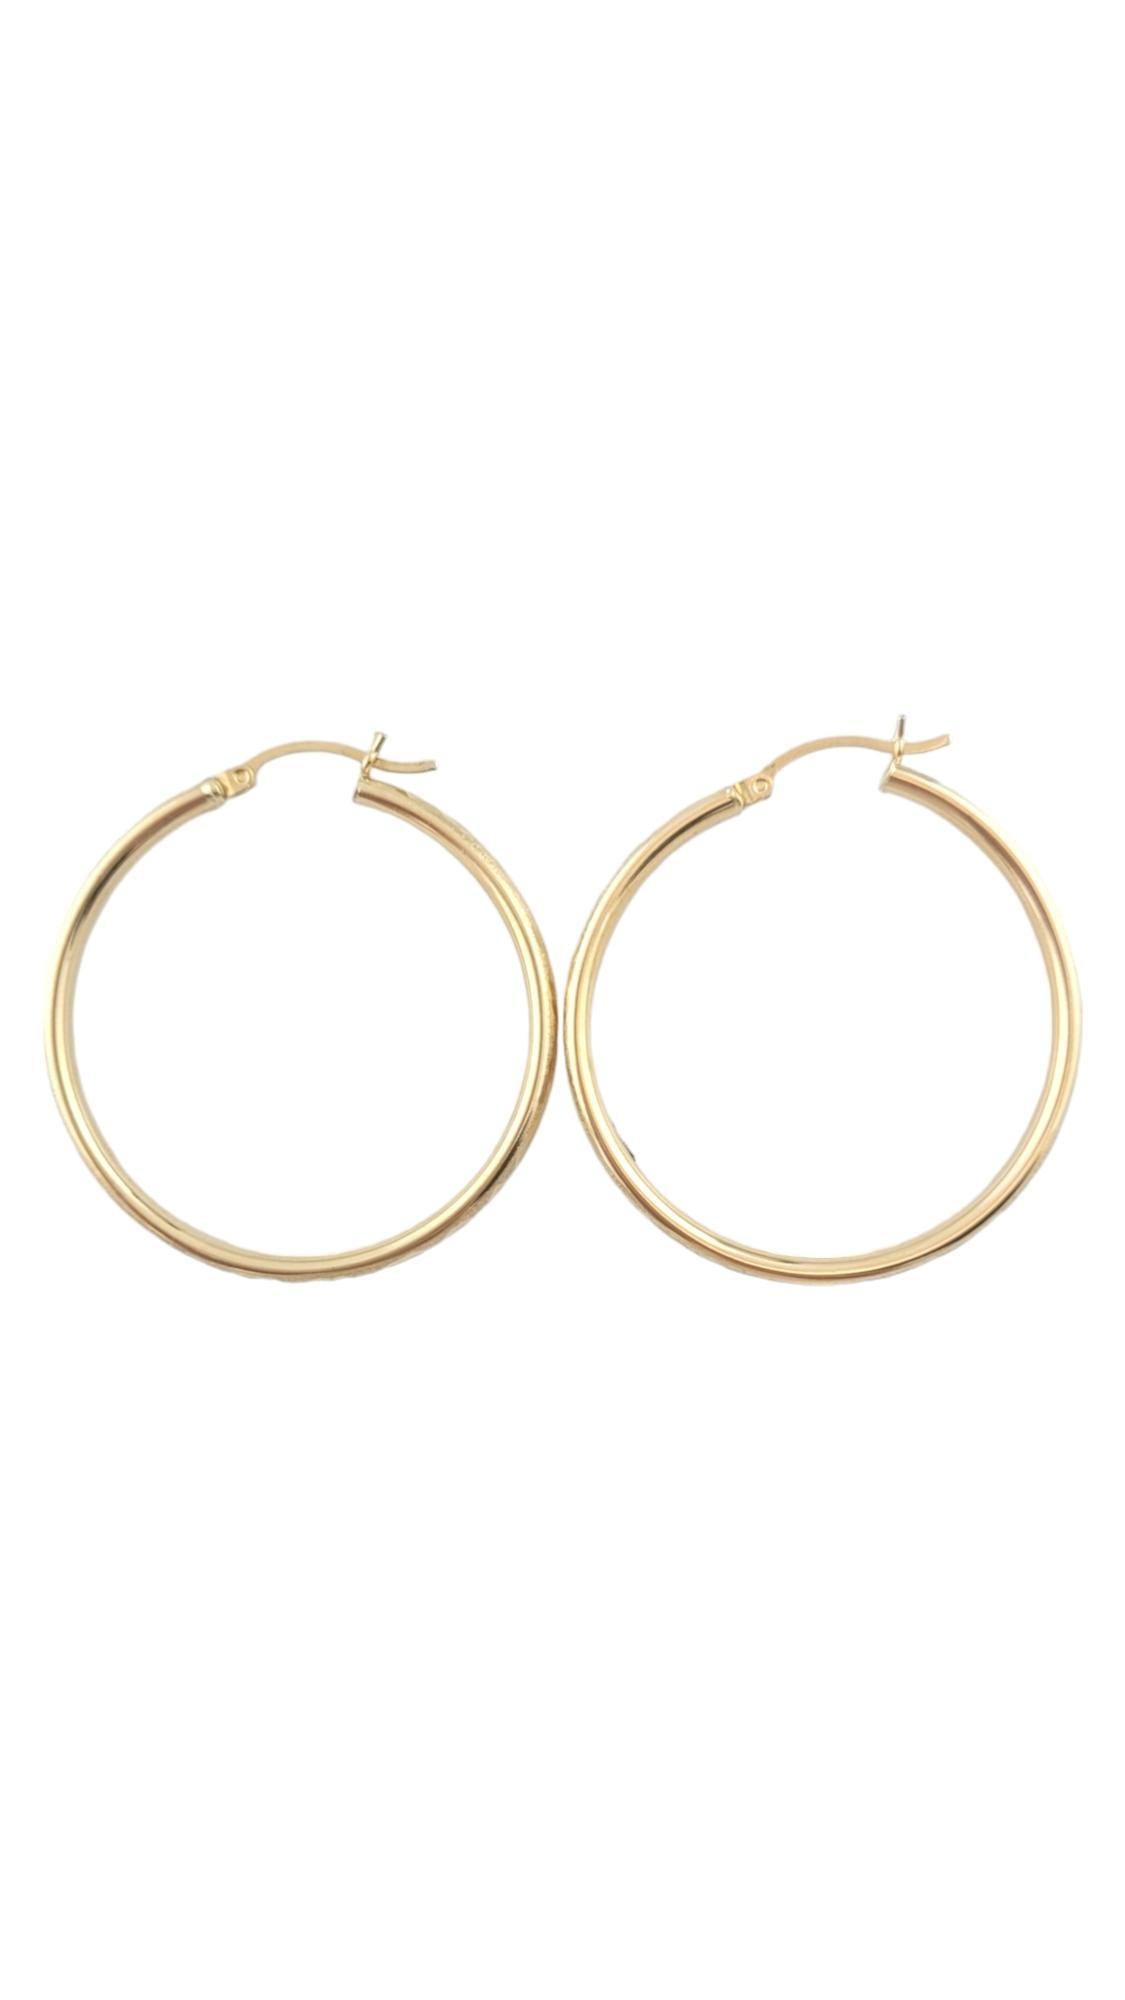 Vintage 14K Yellow Gold X Pattern Circle Hoops

This gorgeous set of 14K yellow gold circle hoop earrings have a beautiful X pattern around the outside!

Diameter: 38.07mm
Width: 3.46

Weight: 2.6 dwt/ 4.1 g

Hallmark: AS 14K

Very good condition,